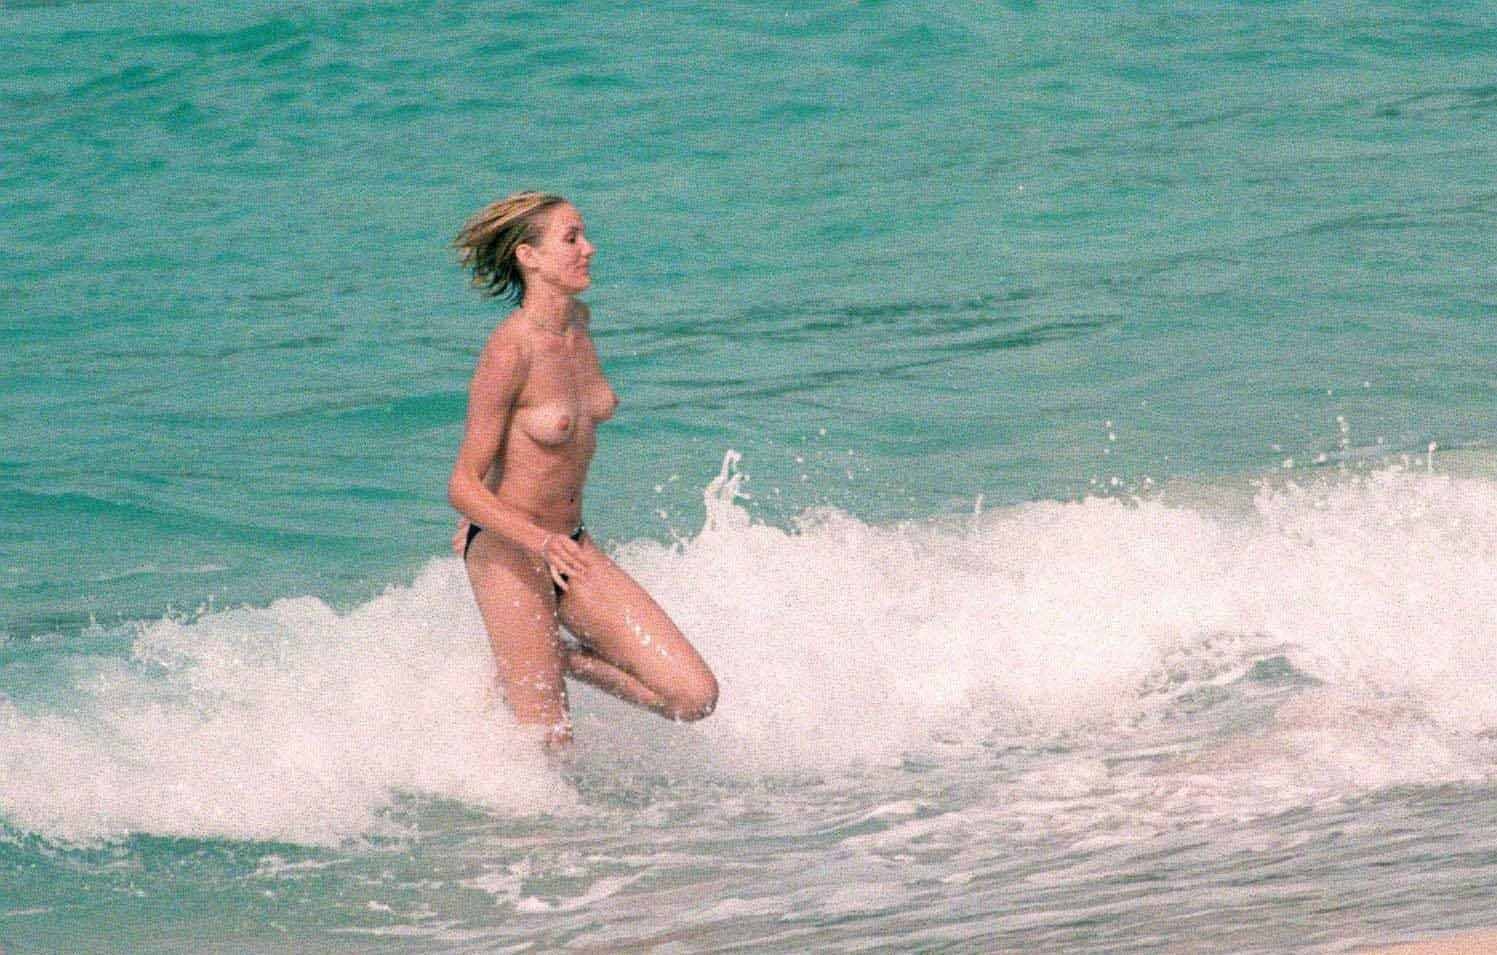 Cameron diaz nude – Thefappening.pm – Celebrity photo leaks